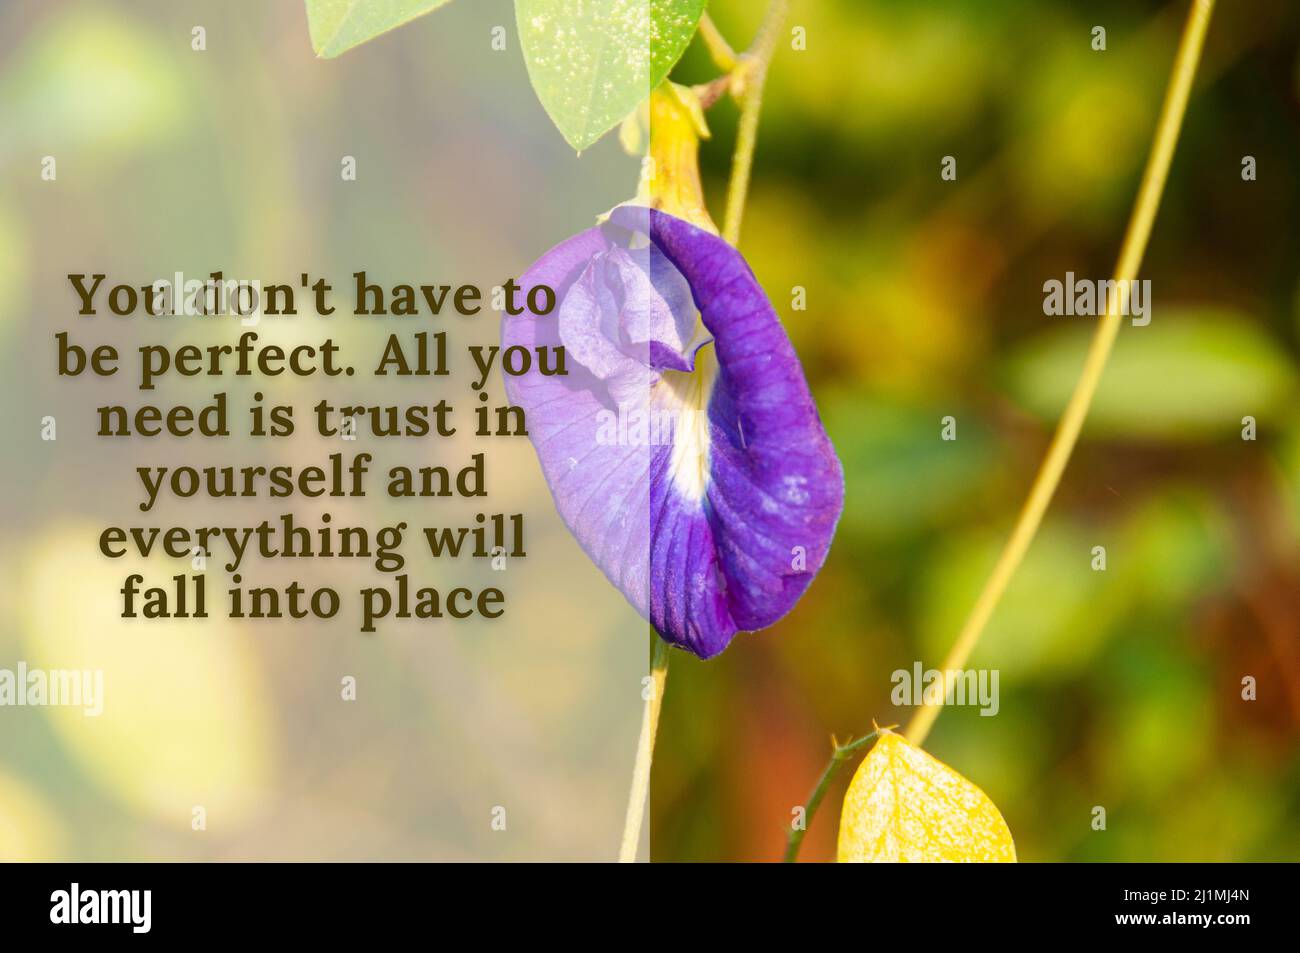 Motivational and inpirational quote about perfection with blurred purple flower and blurred nature background. Motivational concept Stock Photo